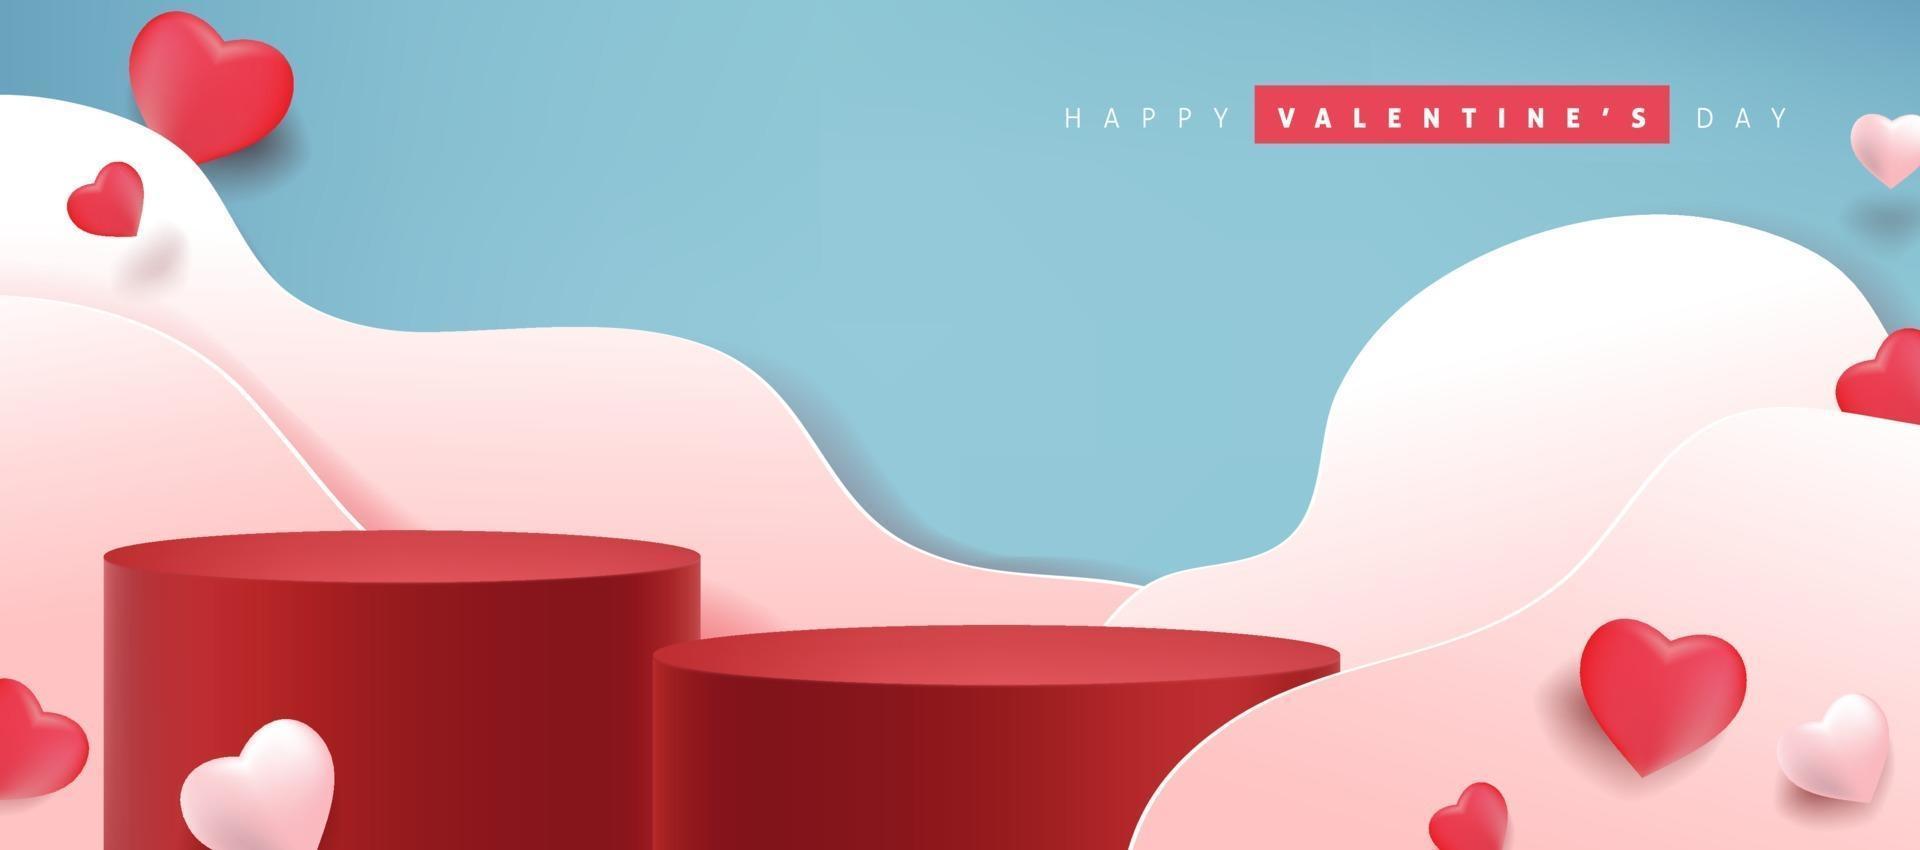 Valentine's day background with product display and heart shaped balloons. vector